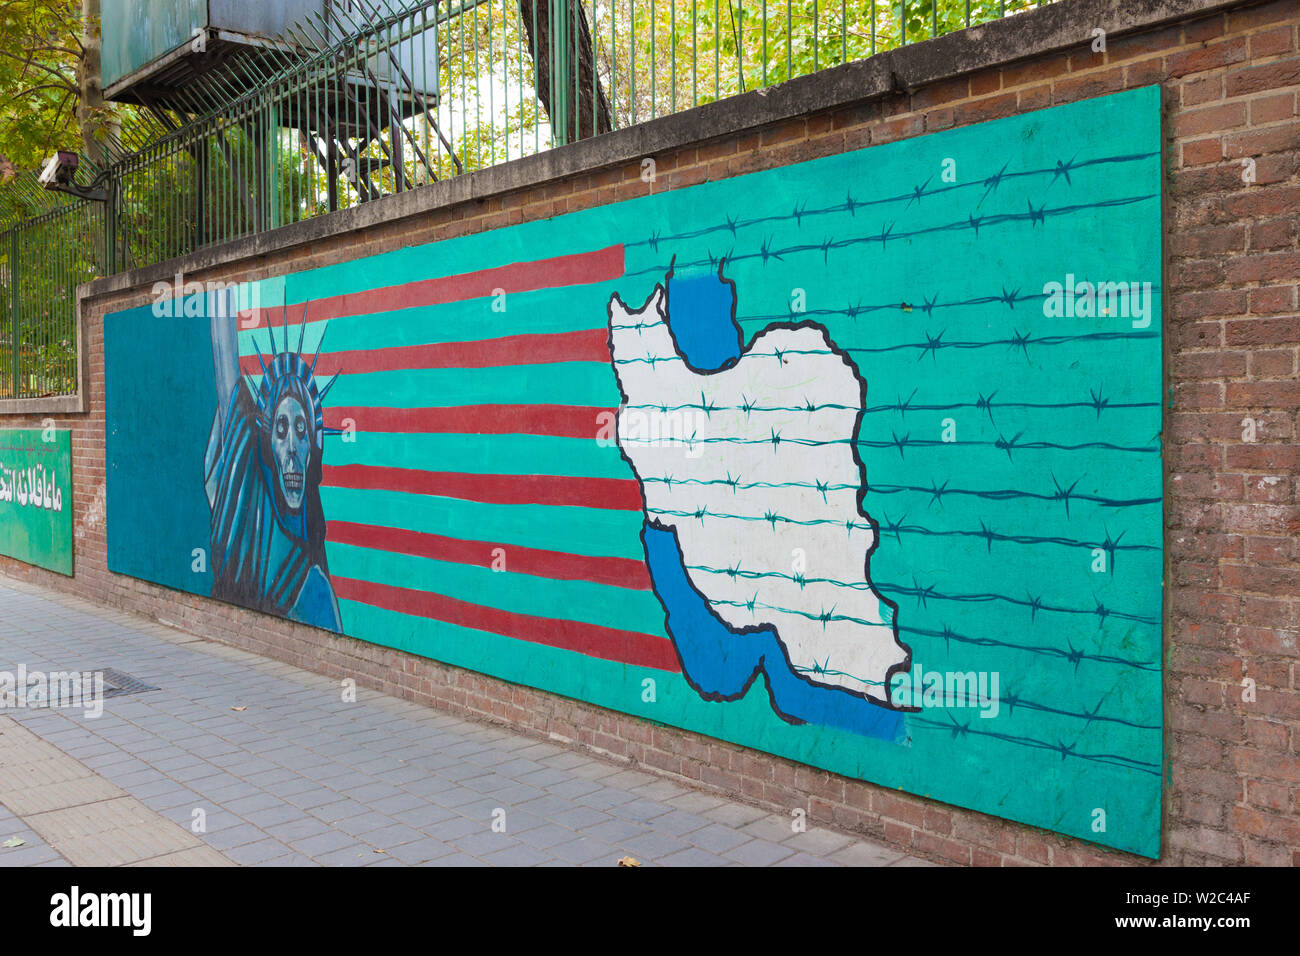 Iran, Tehran, anti-US propaganda mural on the outer walls of the former US embassy, known as the Den of US Espionage Stock Photo